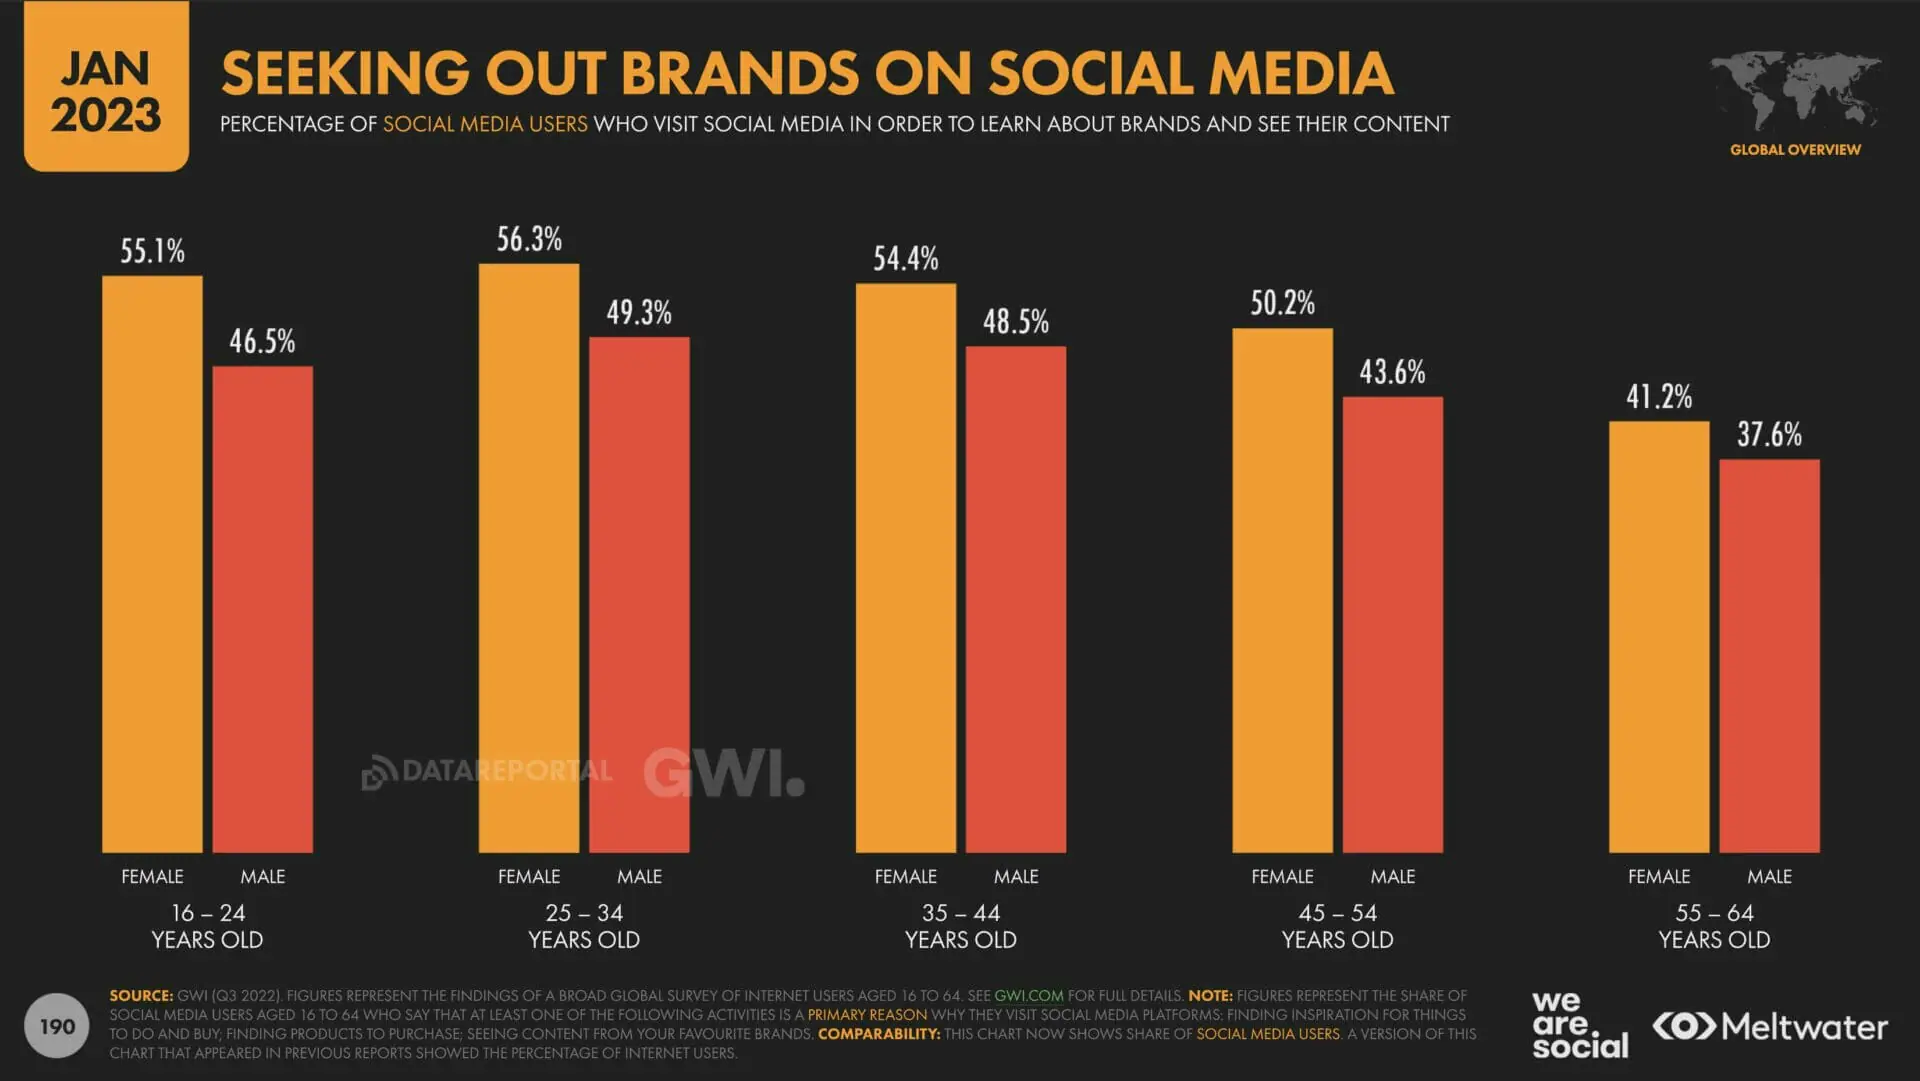 audience age demographics that search out brands on social media